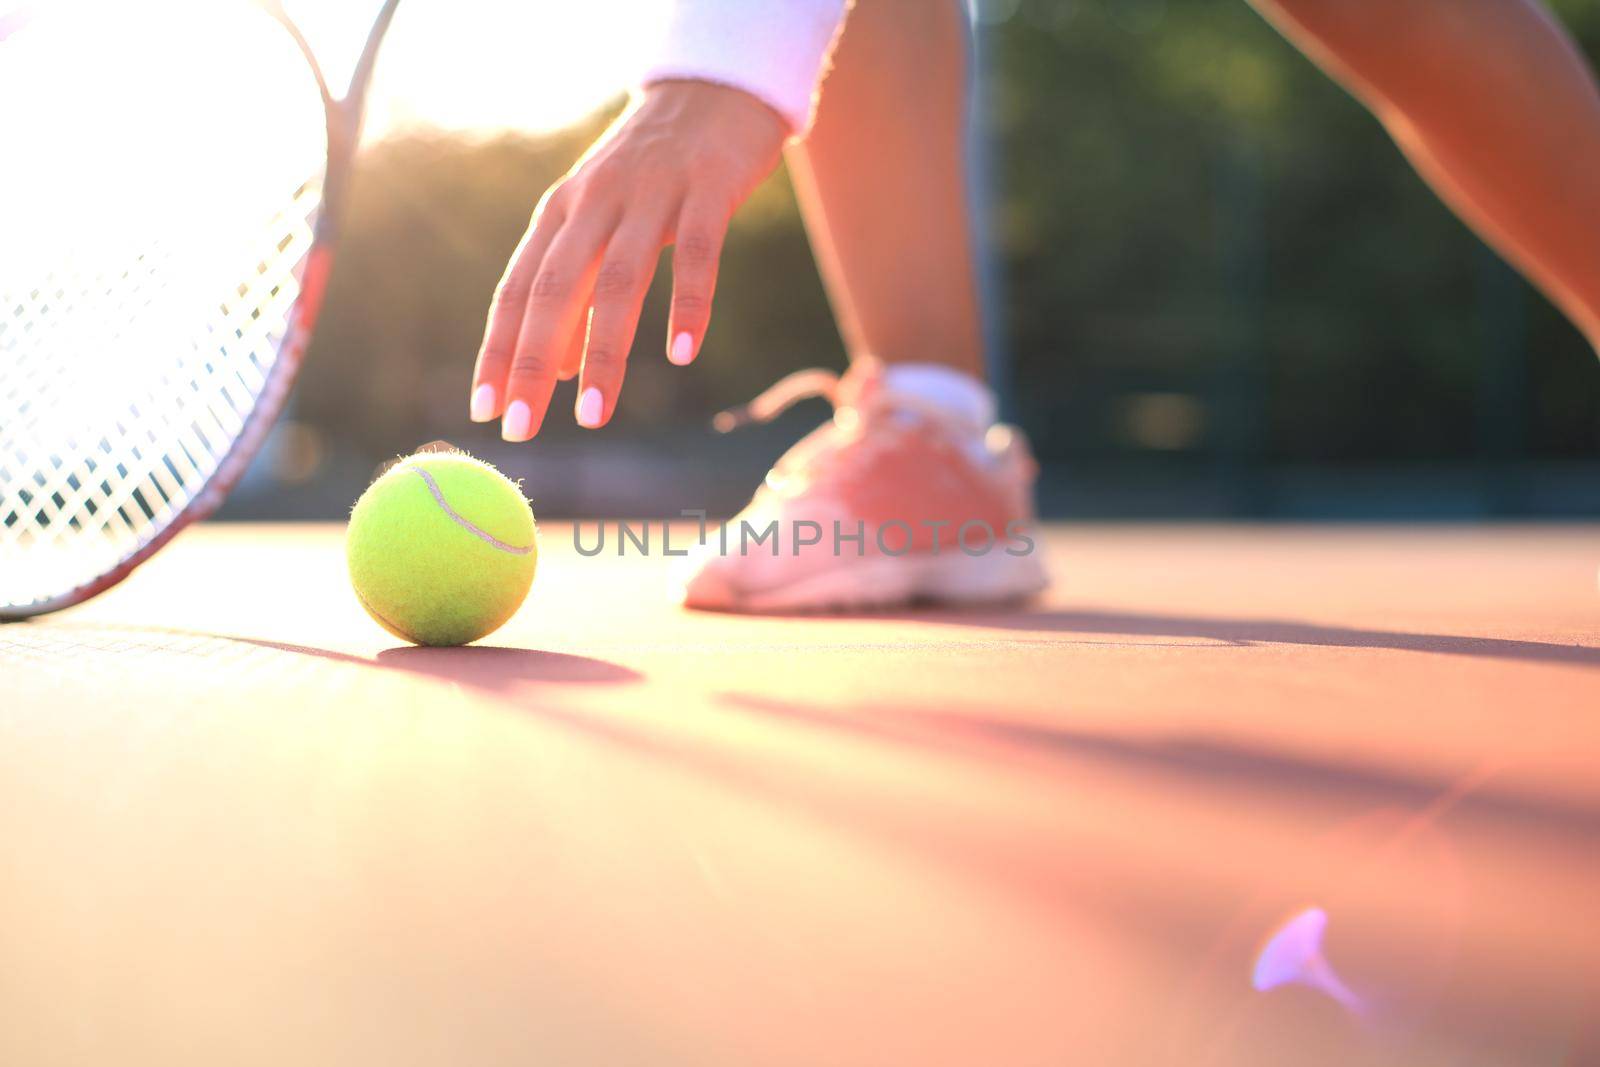 Tennis player raises a tennis ball from the clay court during the game